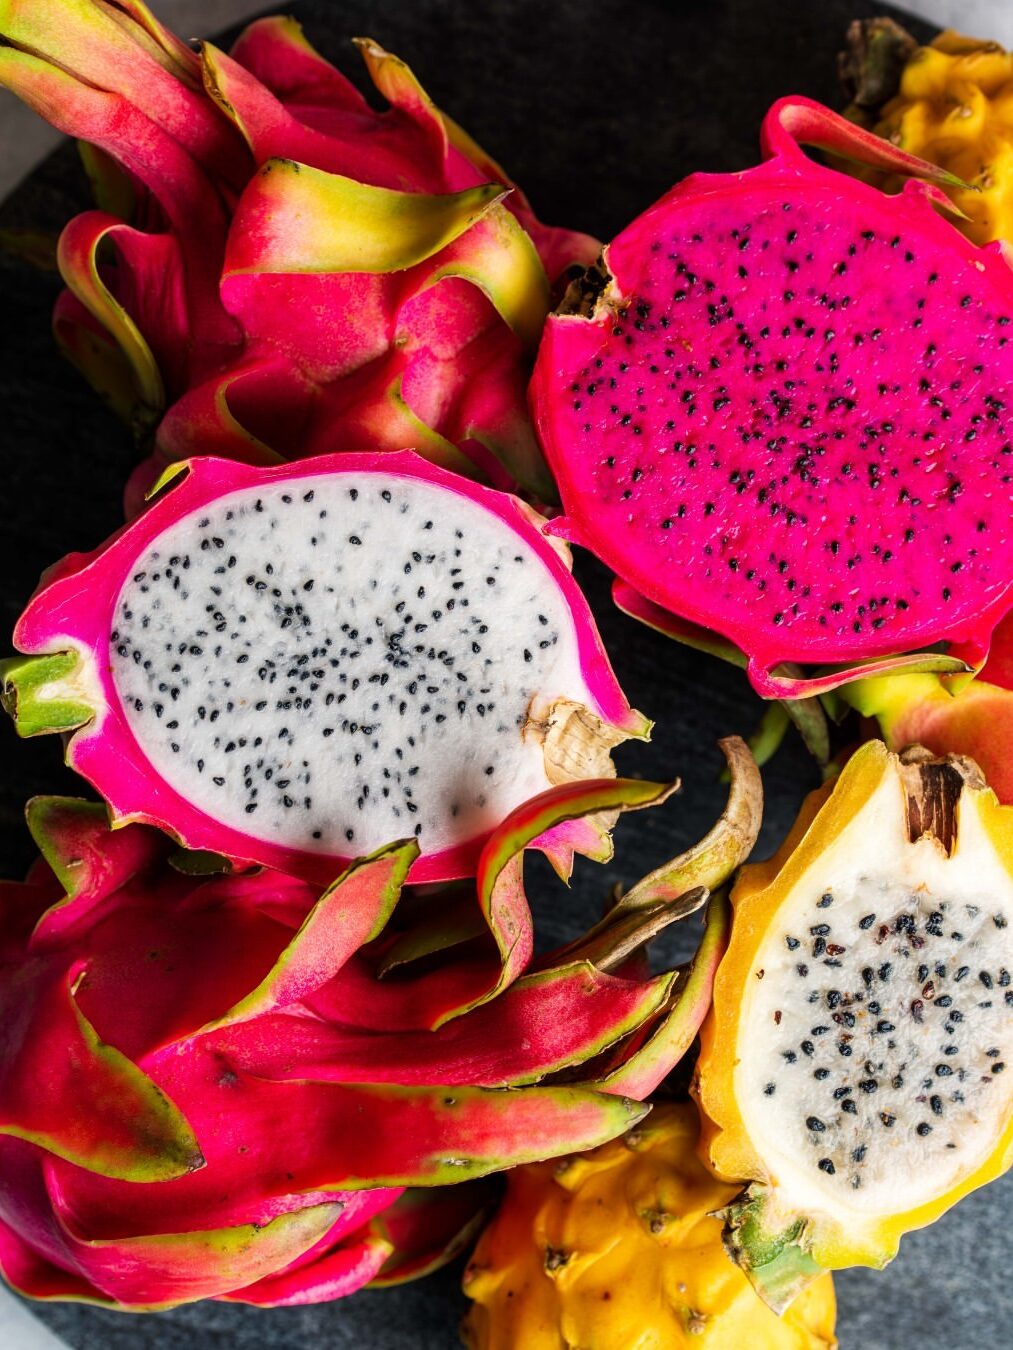 Dragonfruit/Pitaya found in a Melissas produce delivery box.